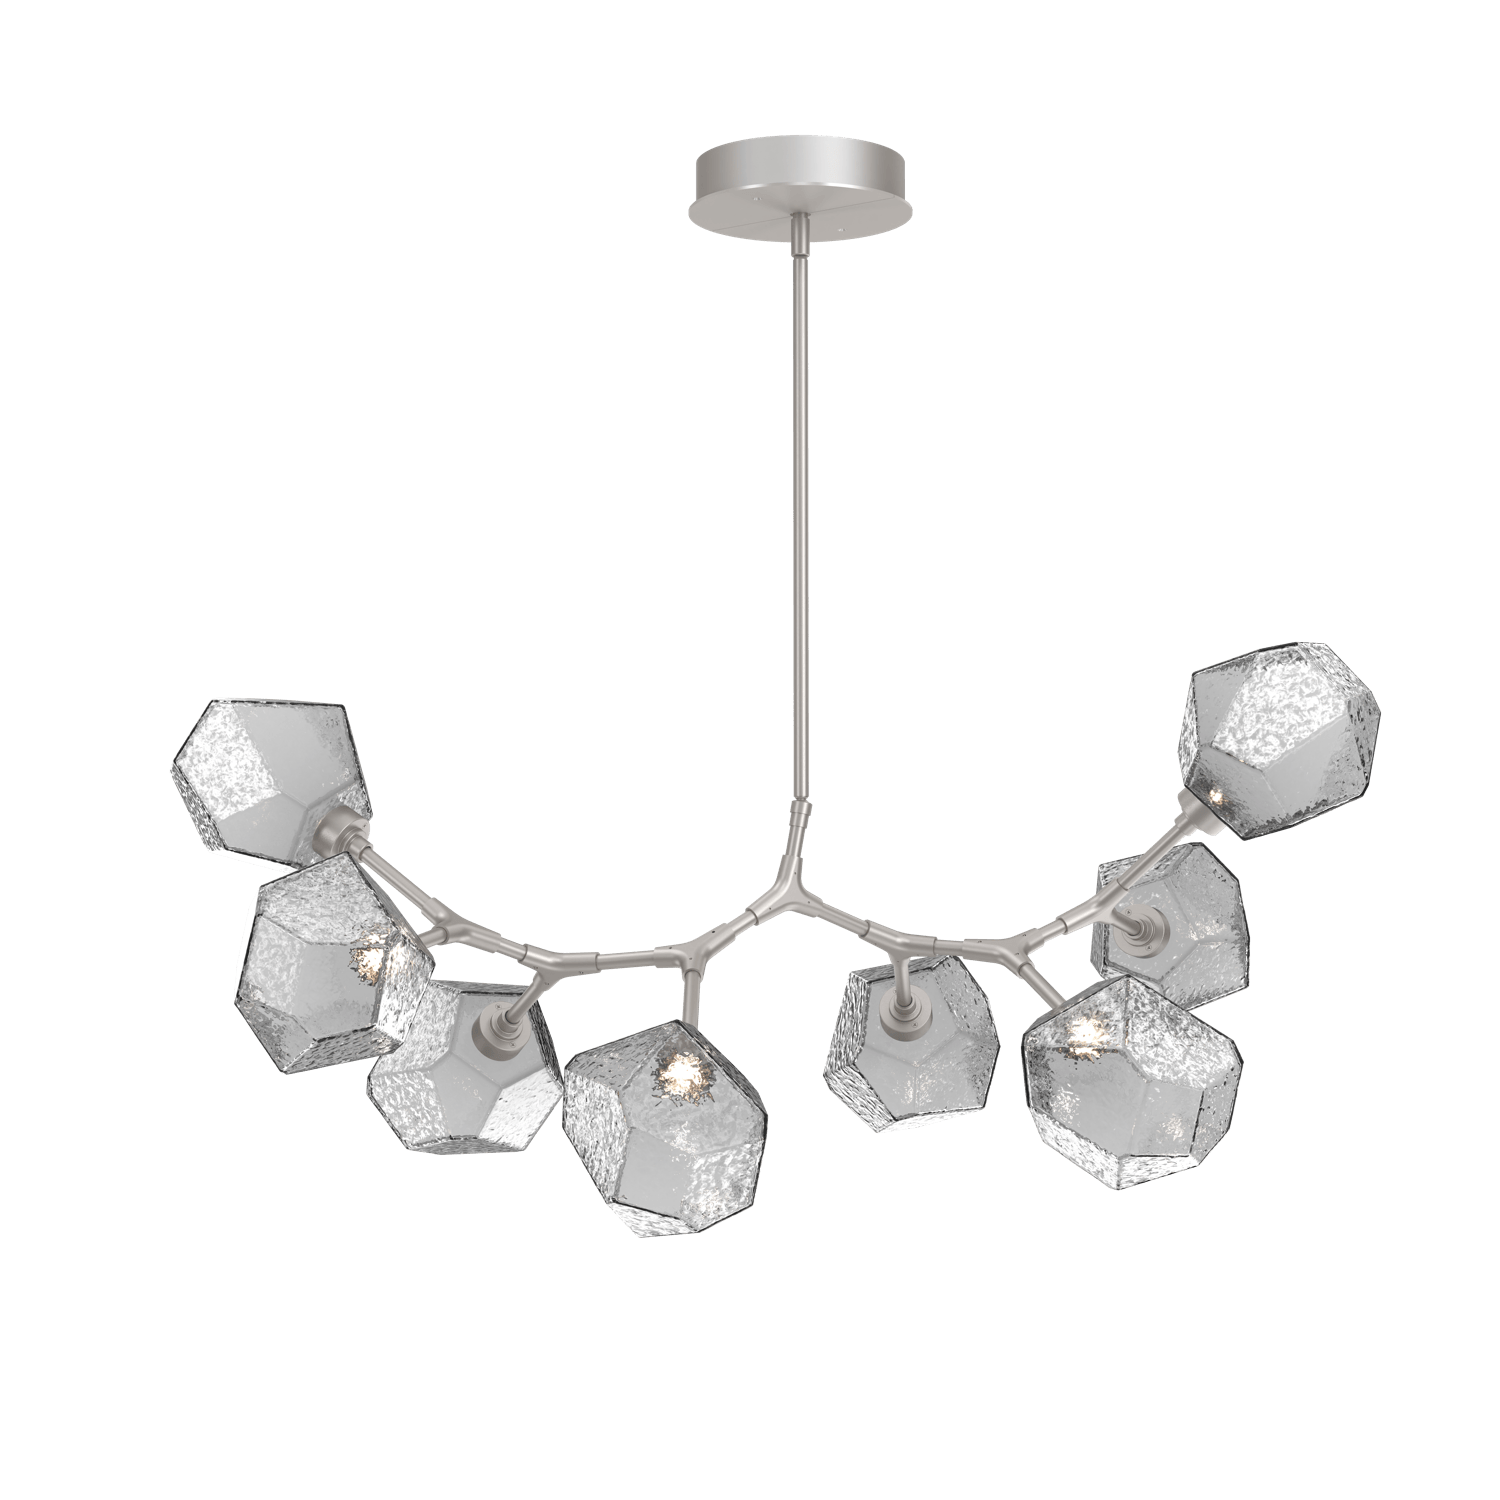 PLB0039-BB-BS-S-Hammerton-Studio-Gem-8-light-modern-branch-chandelier-with-metallic-beige-silver-finish-and-smoke-blown-glass-shades-and-LED-lamping